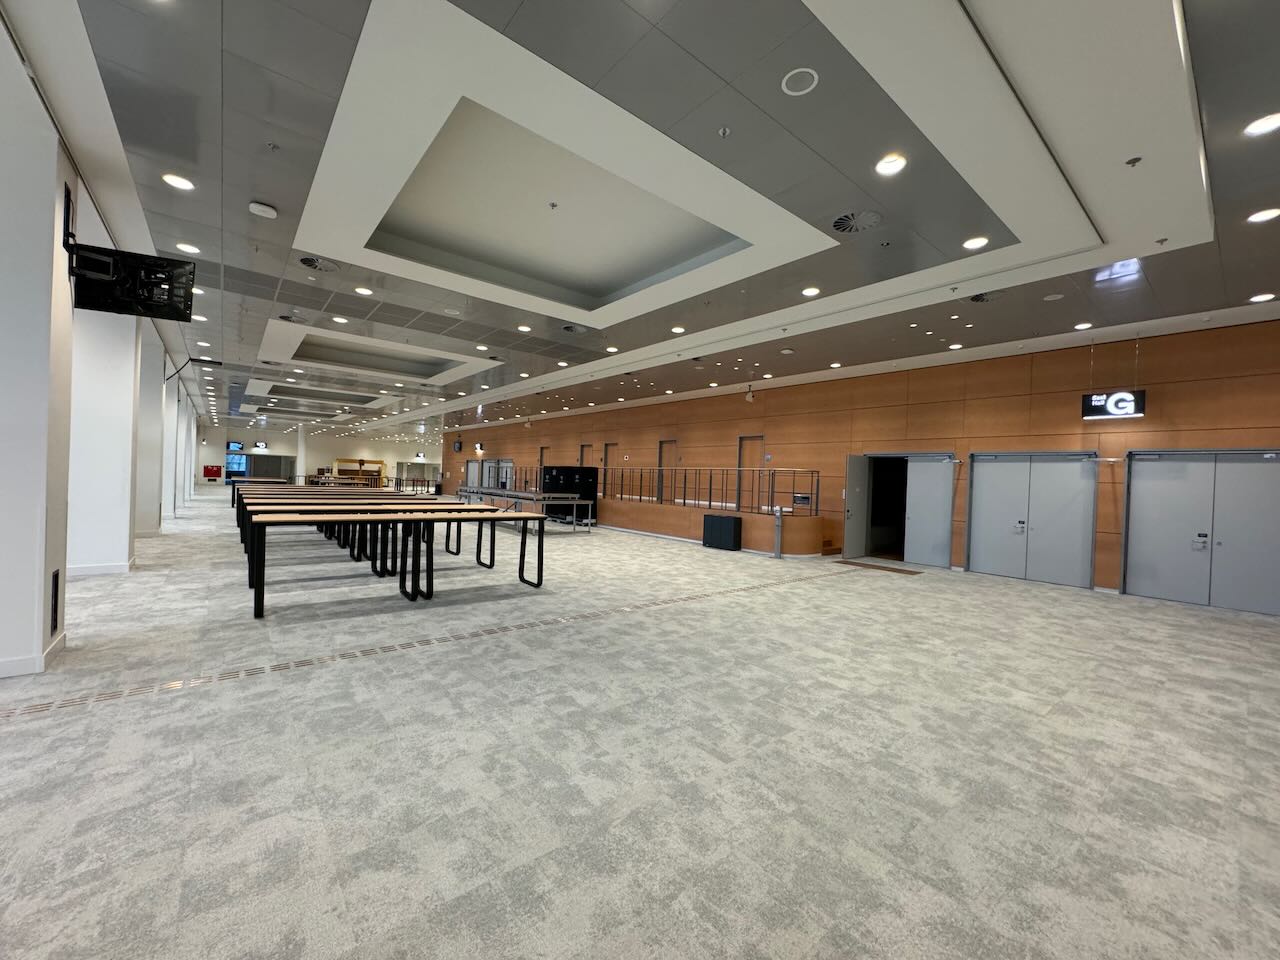  Hall G Foyer, right-hand side